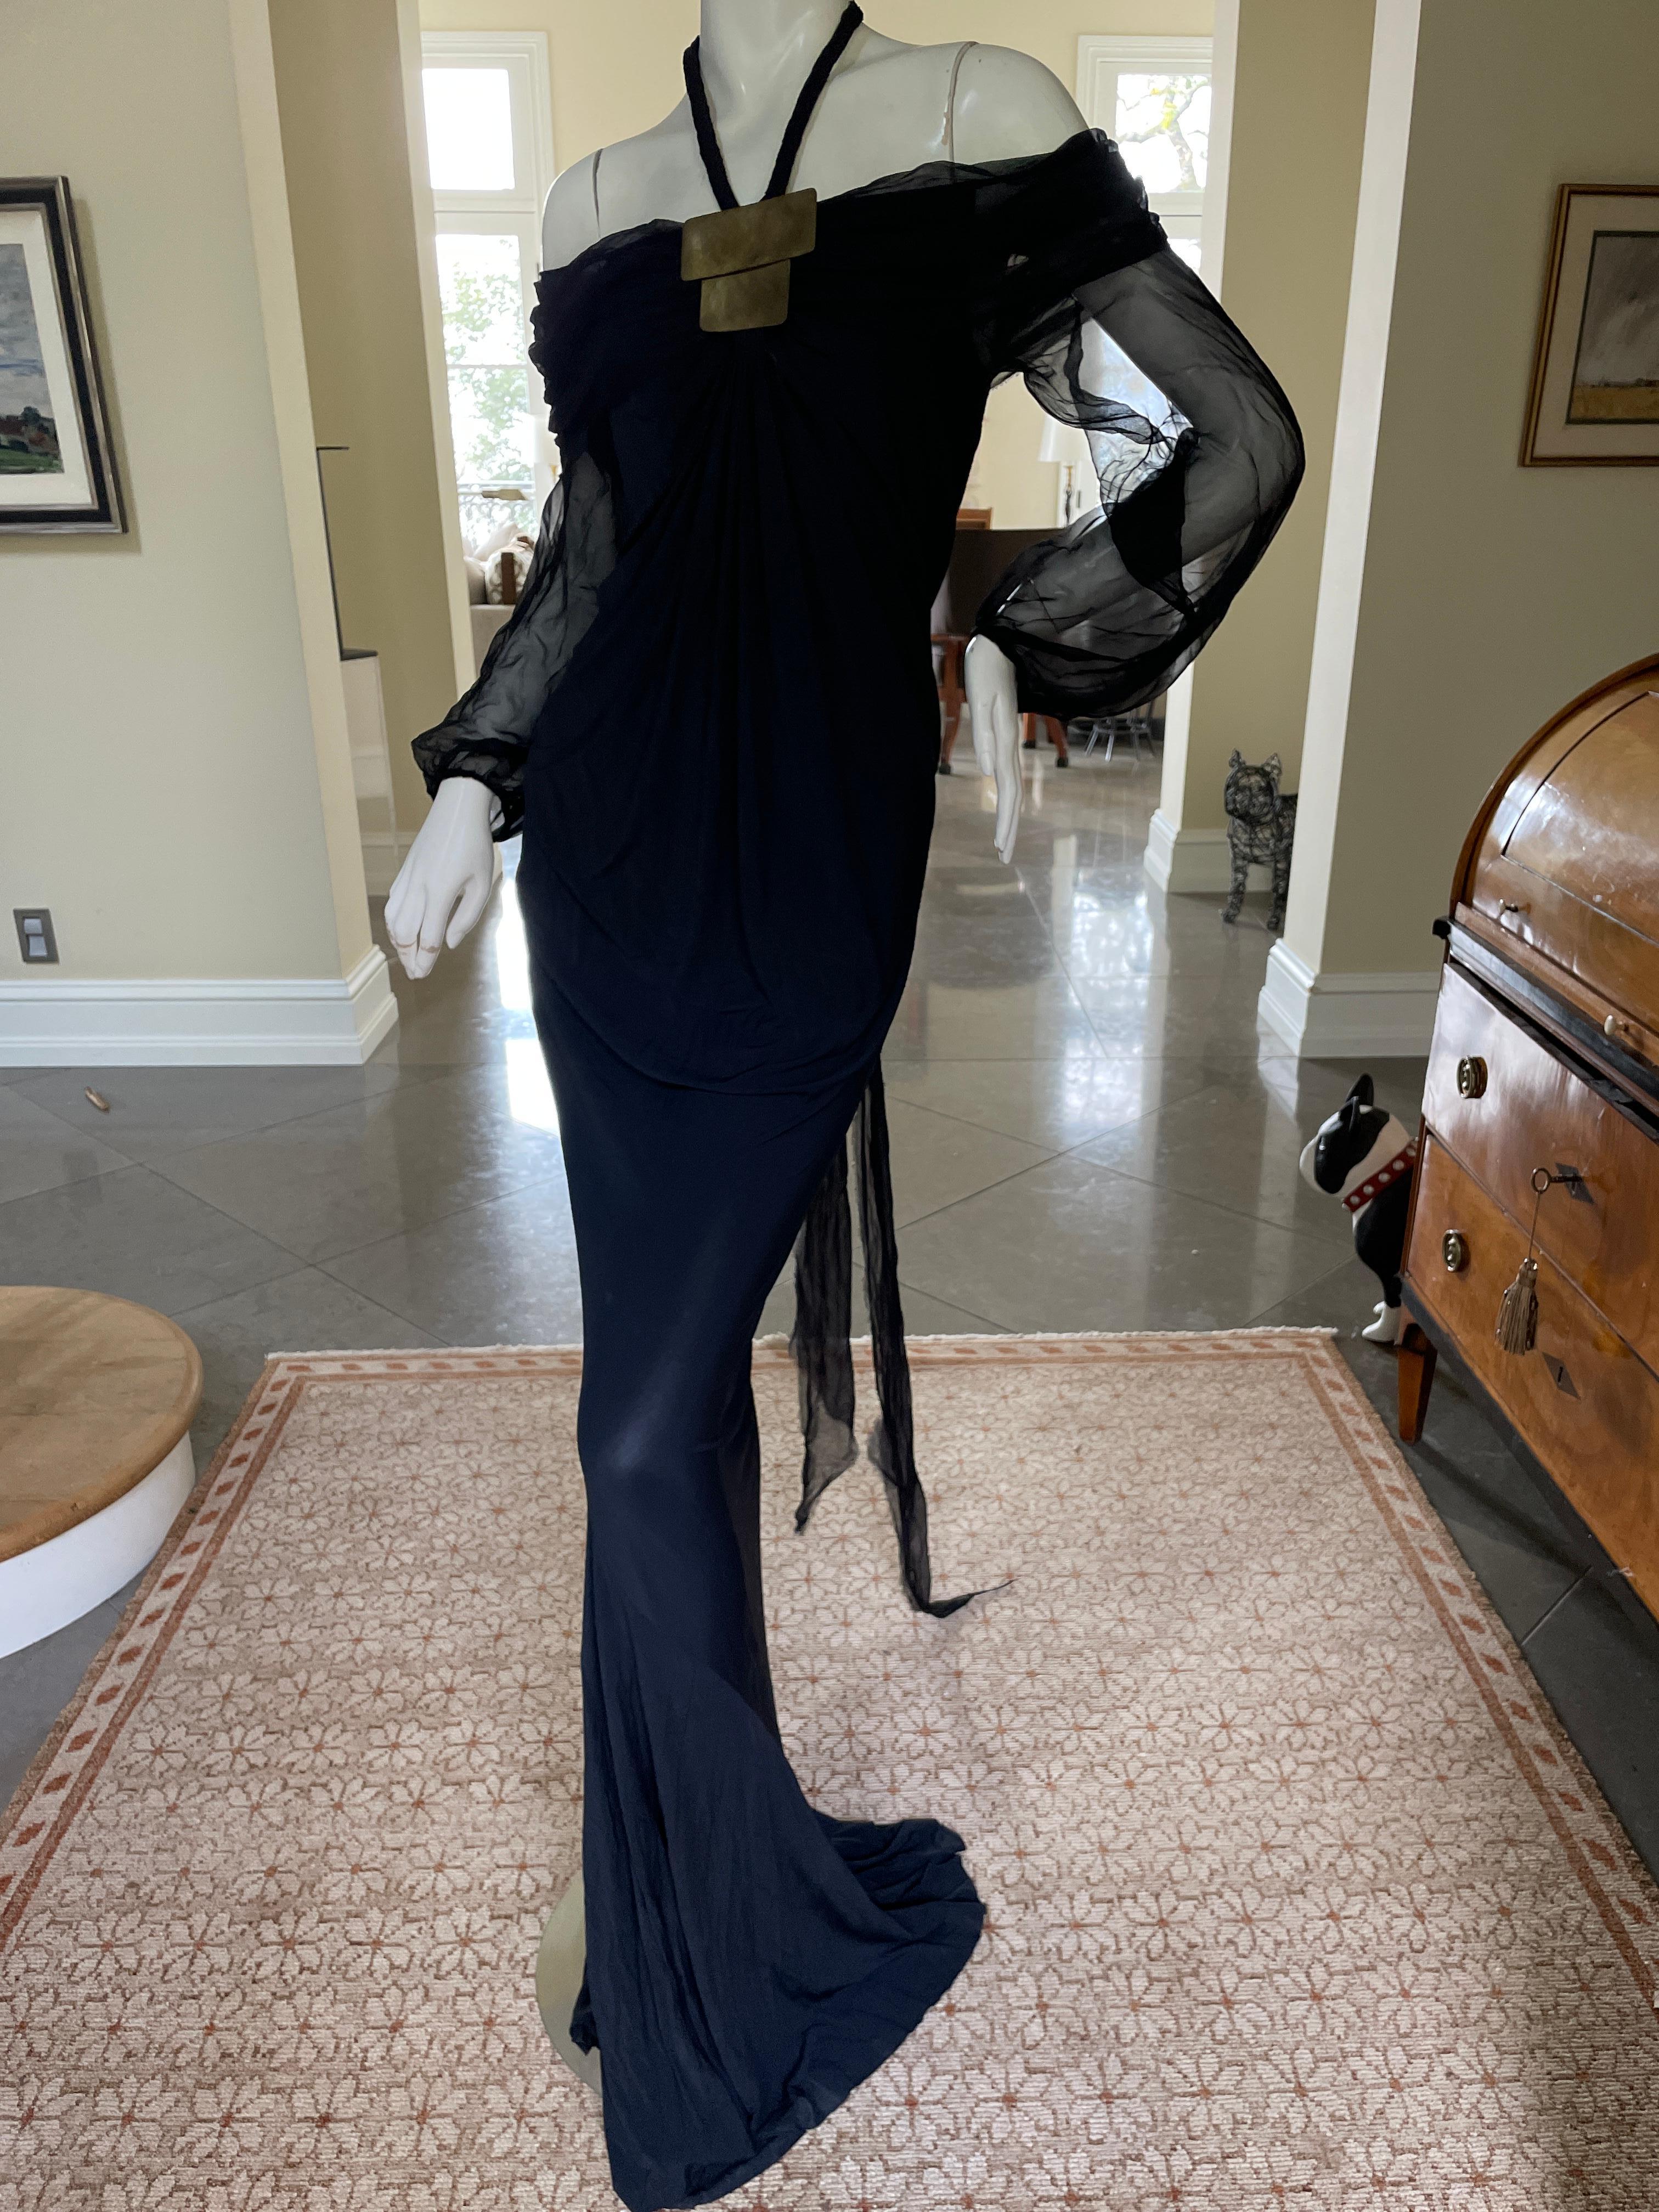 Donna Karan Vintage Off the Shoulder Evening Dress with Robert Lee Morris Brass Ornament
This is so pretty, with raw edged trim
Size M. There is a lot of stretch
Bust 35